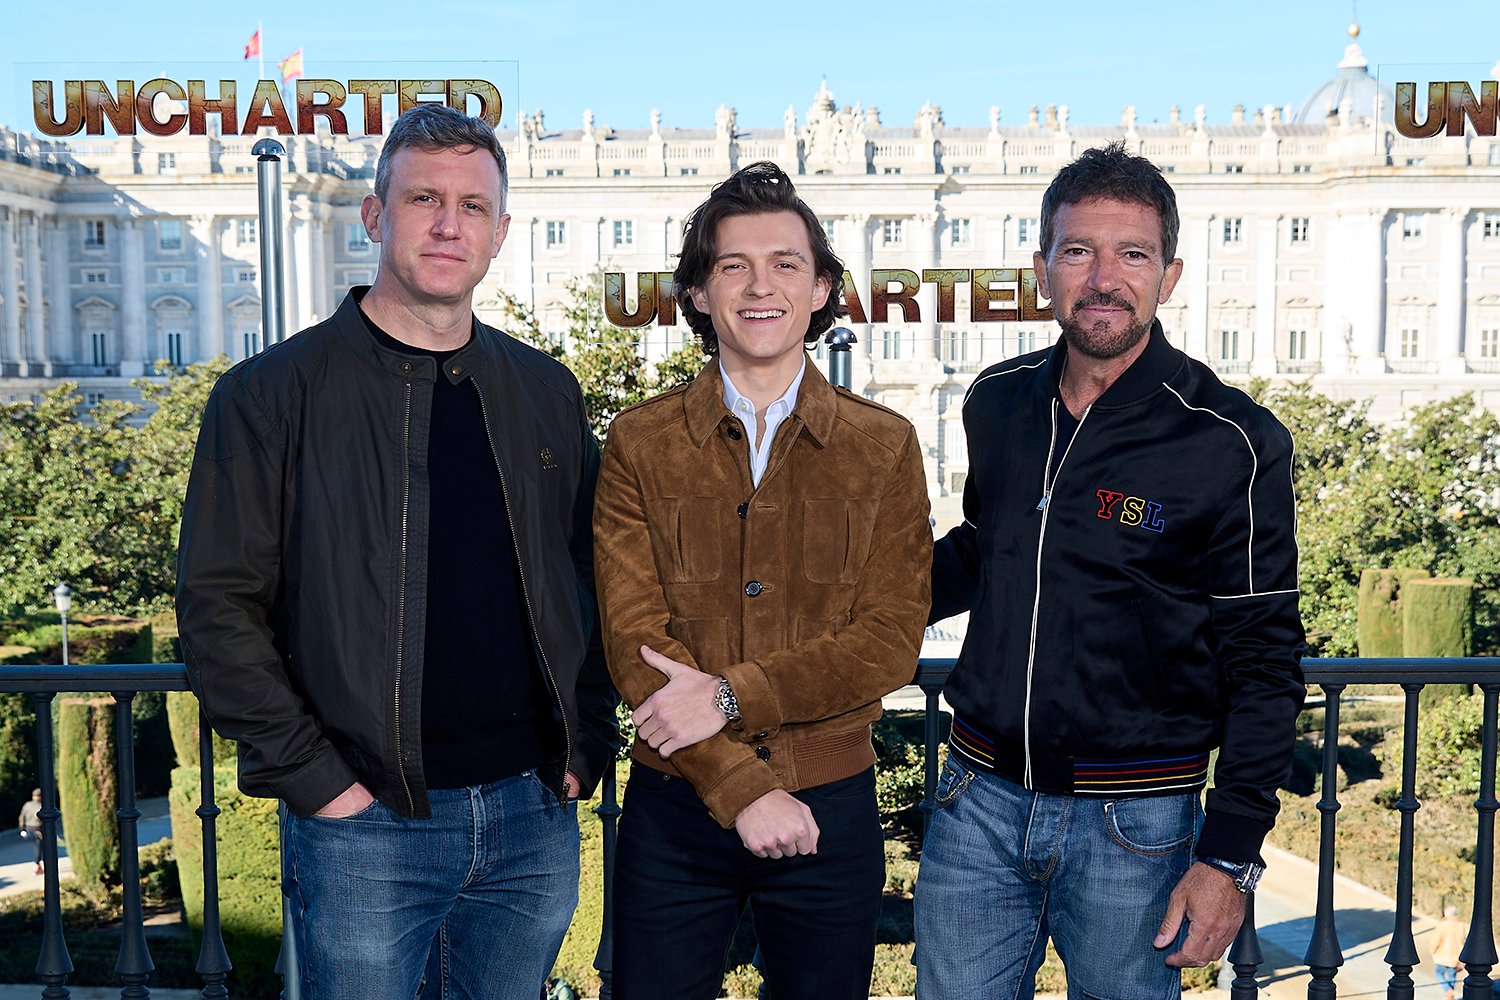 Uncharted director Ruben Fleischer poses with with stars Tom Holland and Antonio Banderas amid sequel and movie franchise discussions